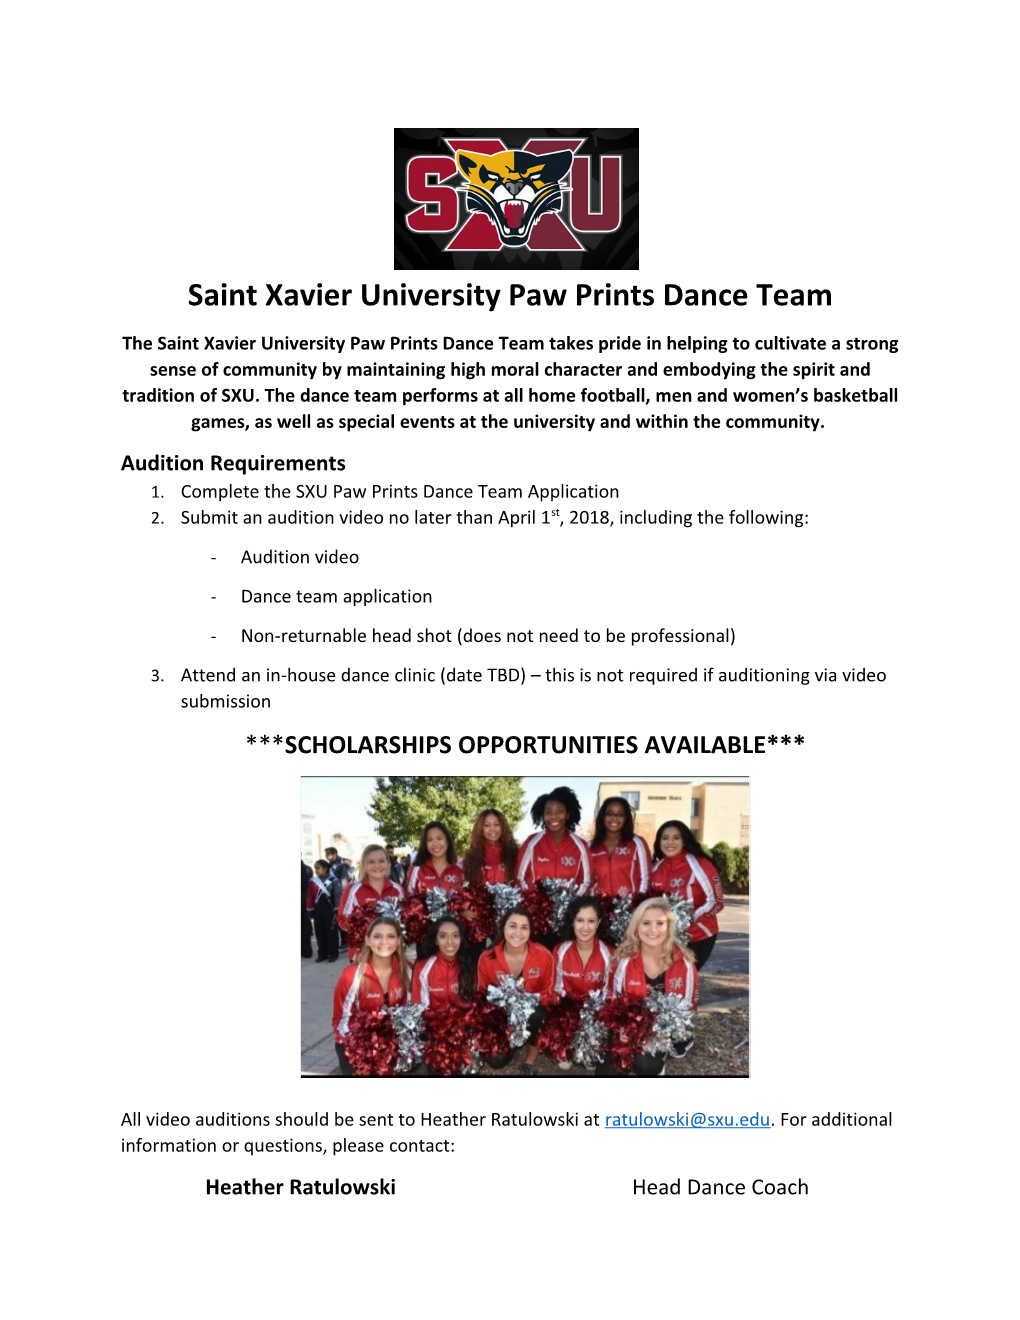 The Saint Xavier University Paw Prints Dance Team Takes Pride in Helping to Cultivate